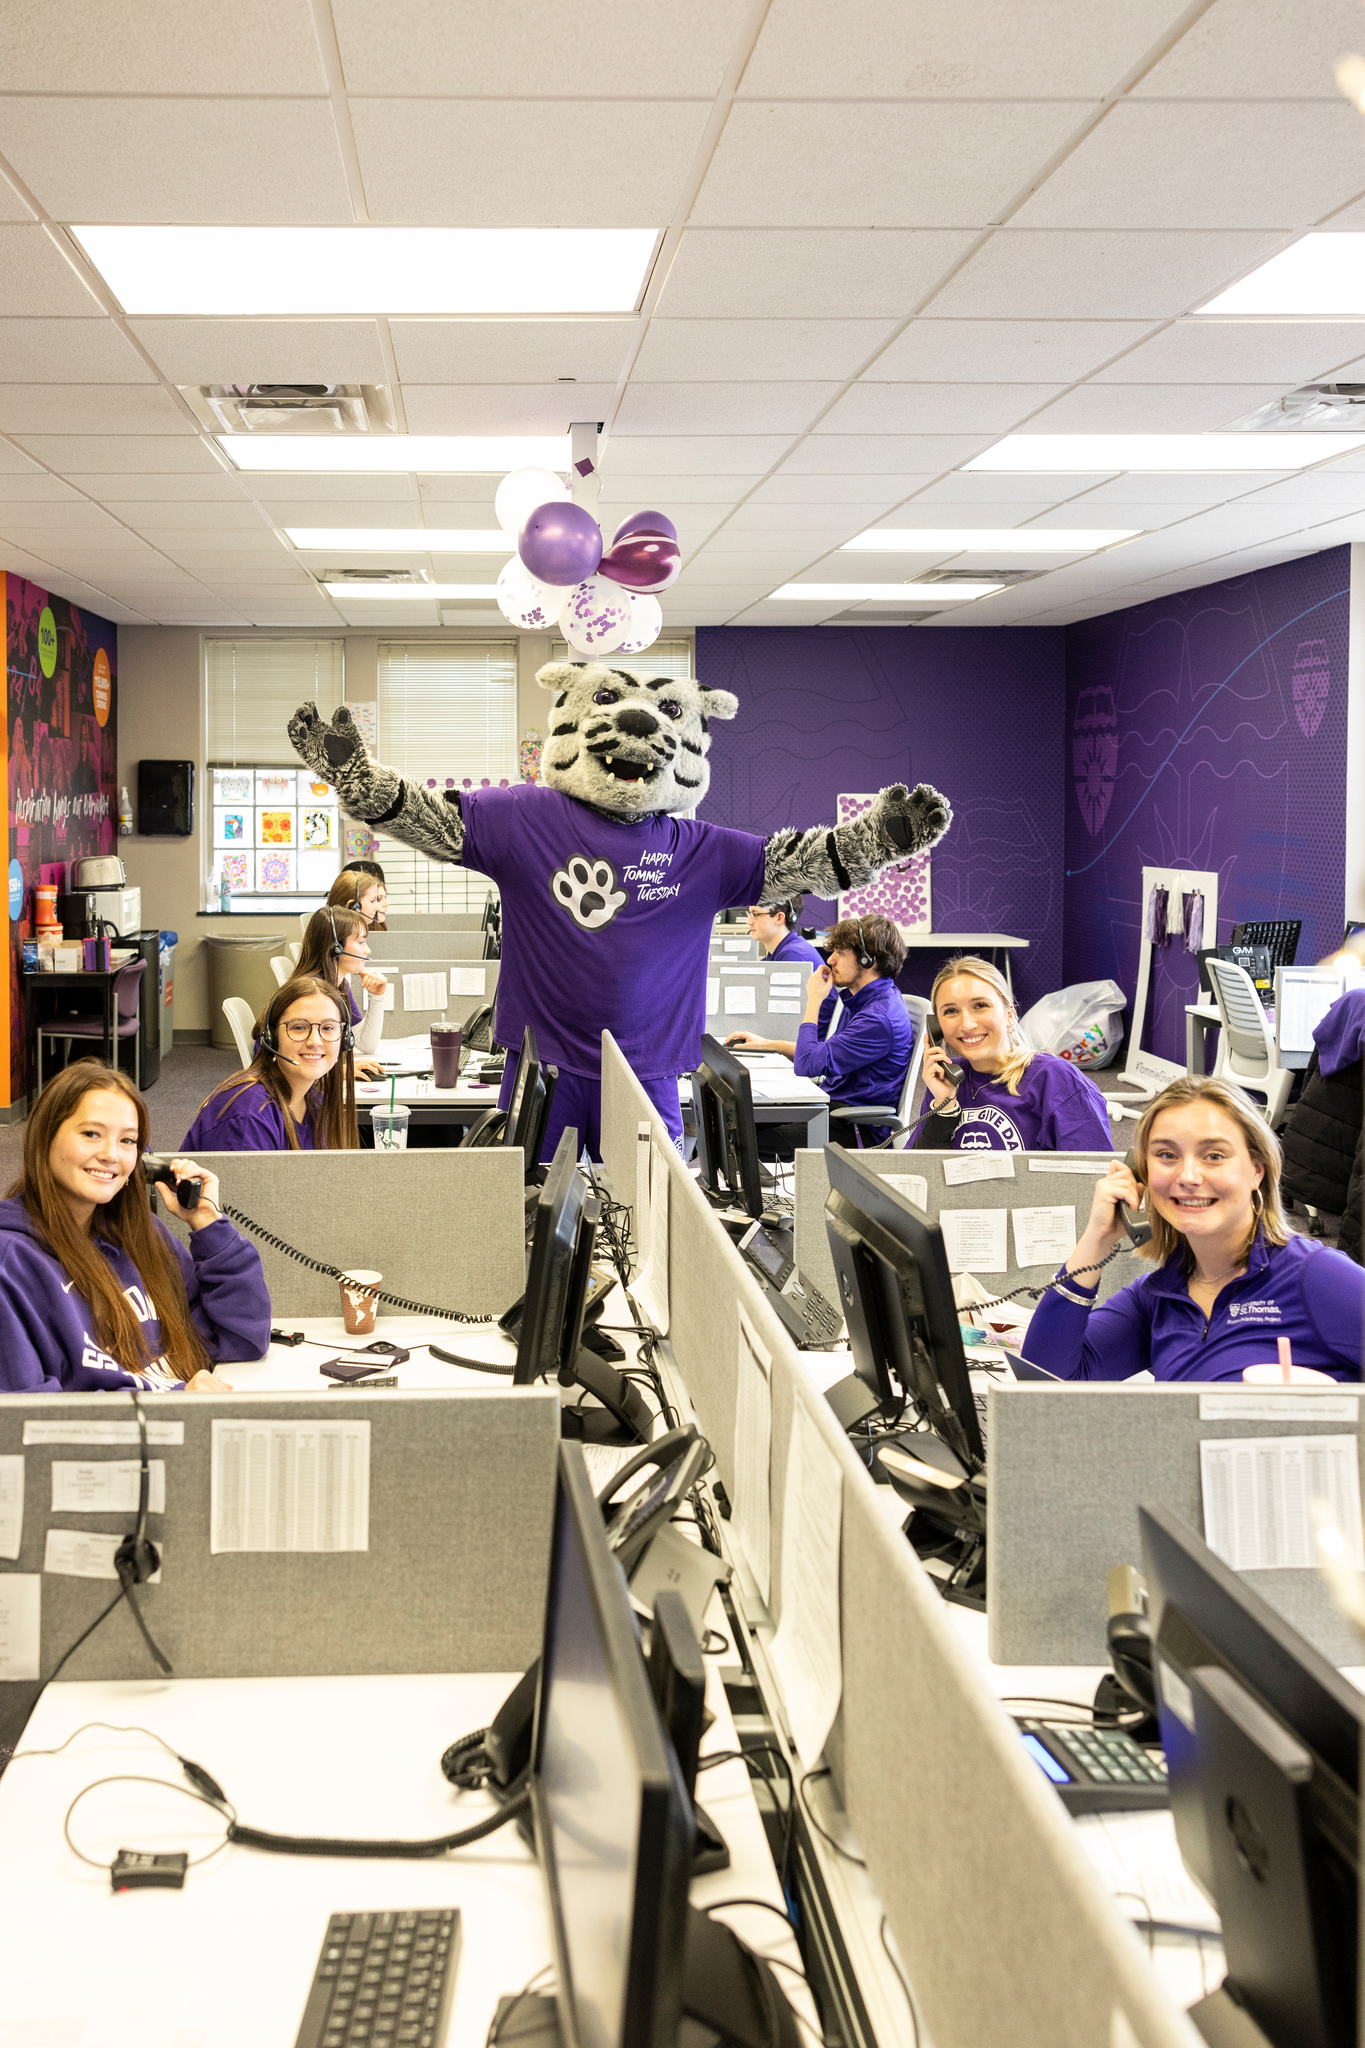 Tommie in the engagement center surrounded by students making calls for Tommie Give Day